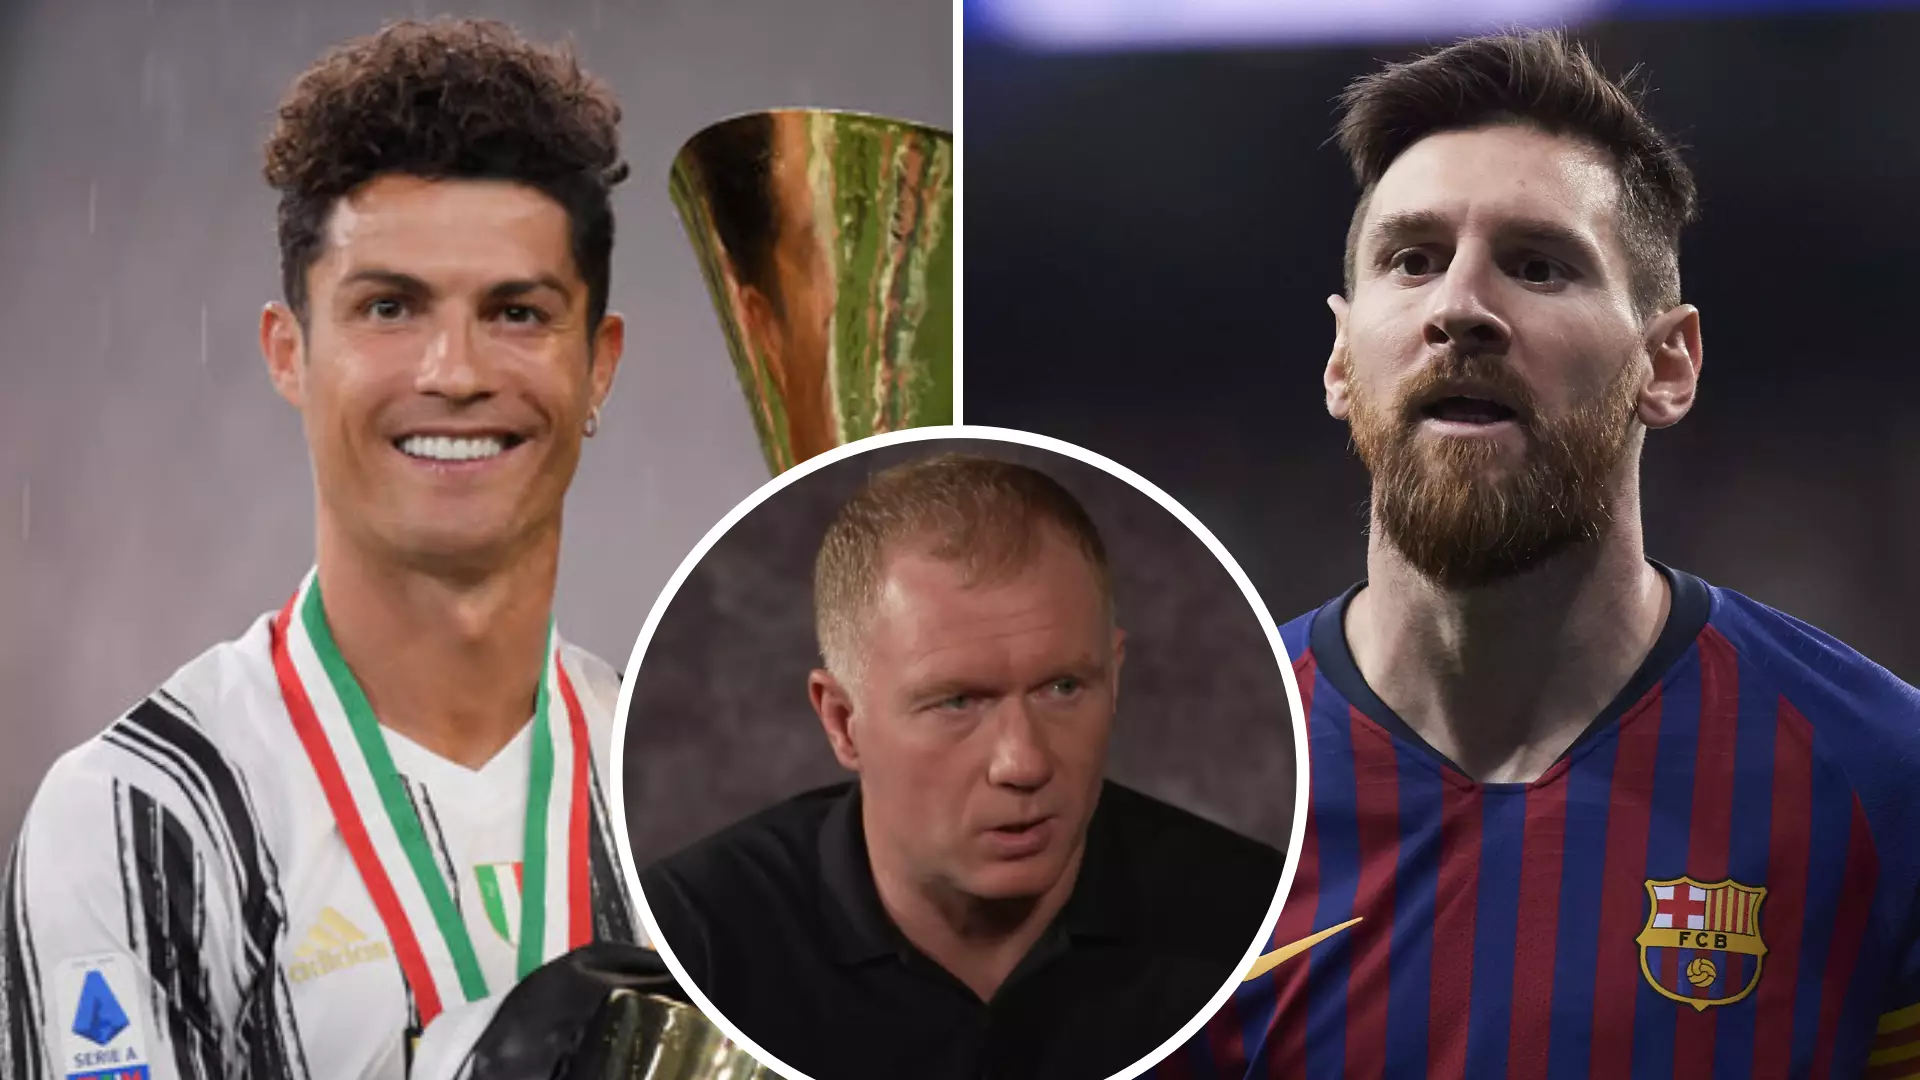 Paul Scholes Names Player Who He Thinks Can Reach 'Levels' Of Cristiano Ronaldo And Lionel Messi